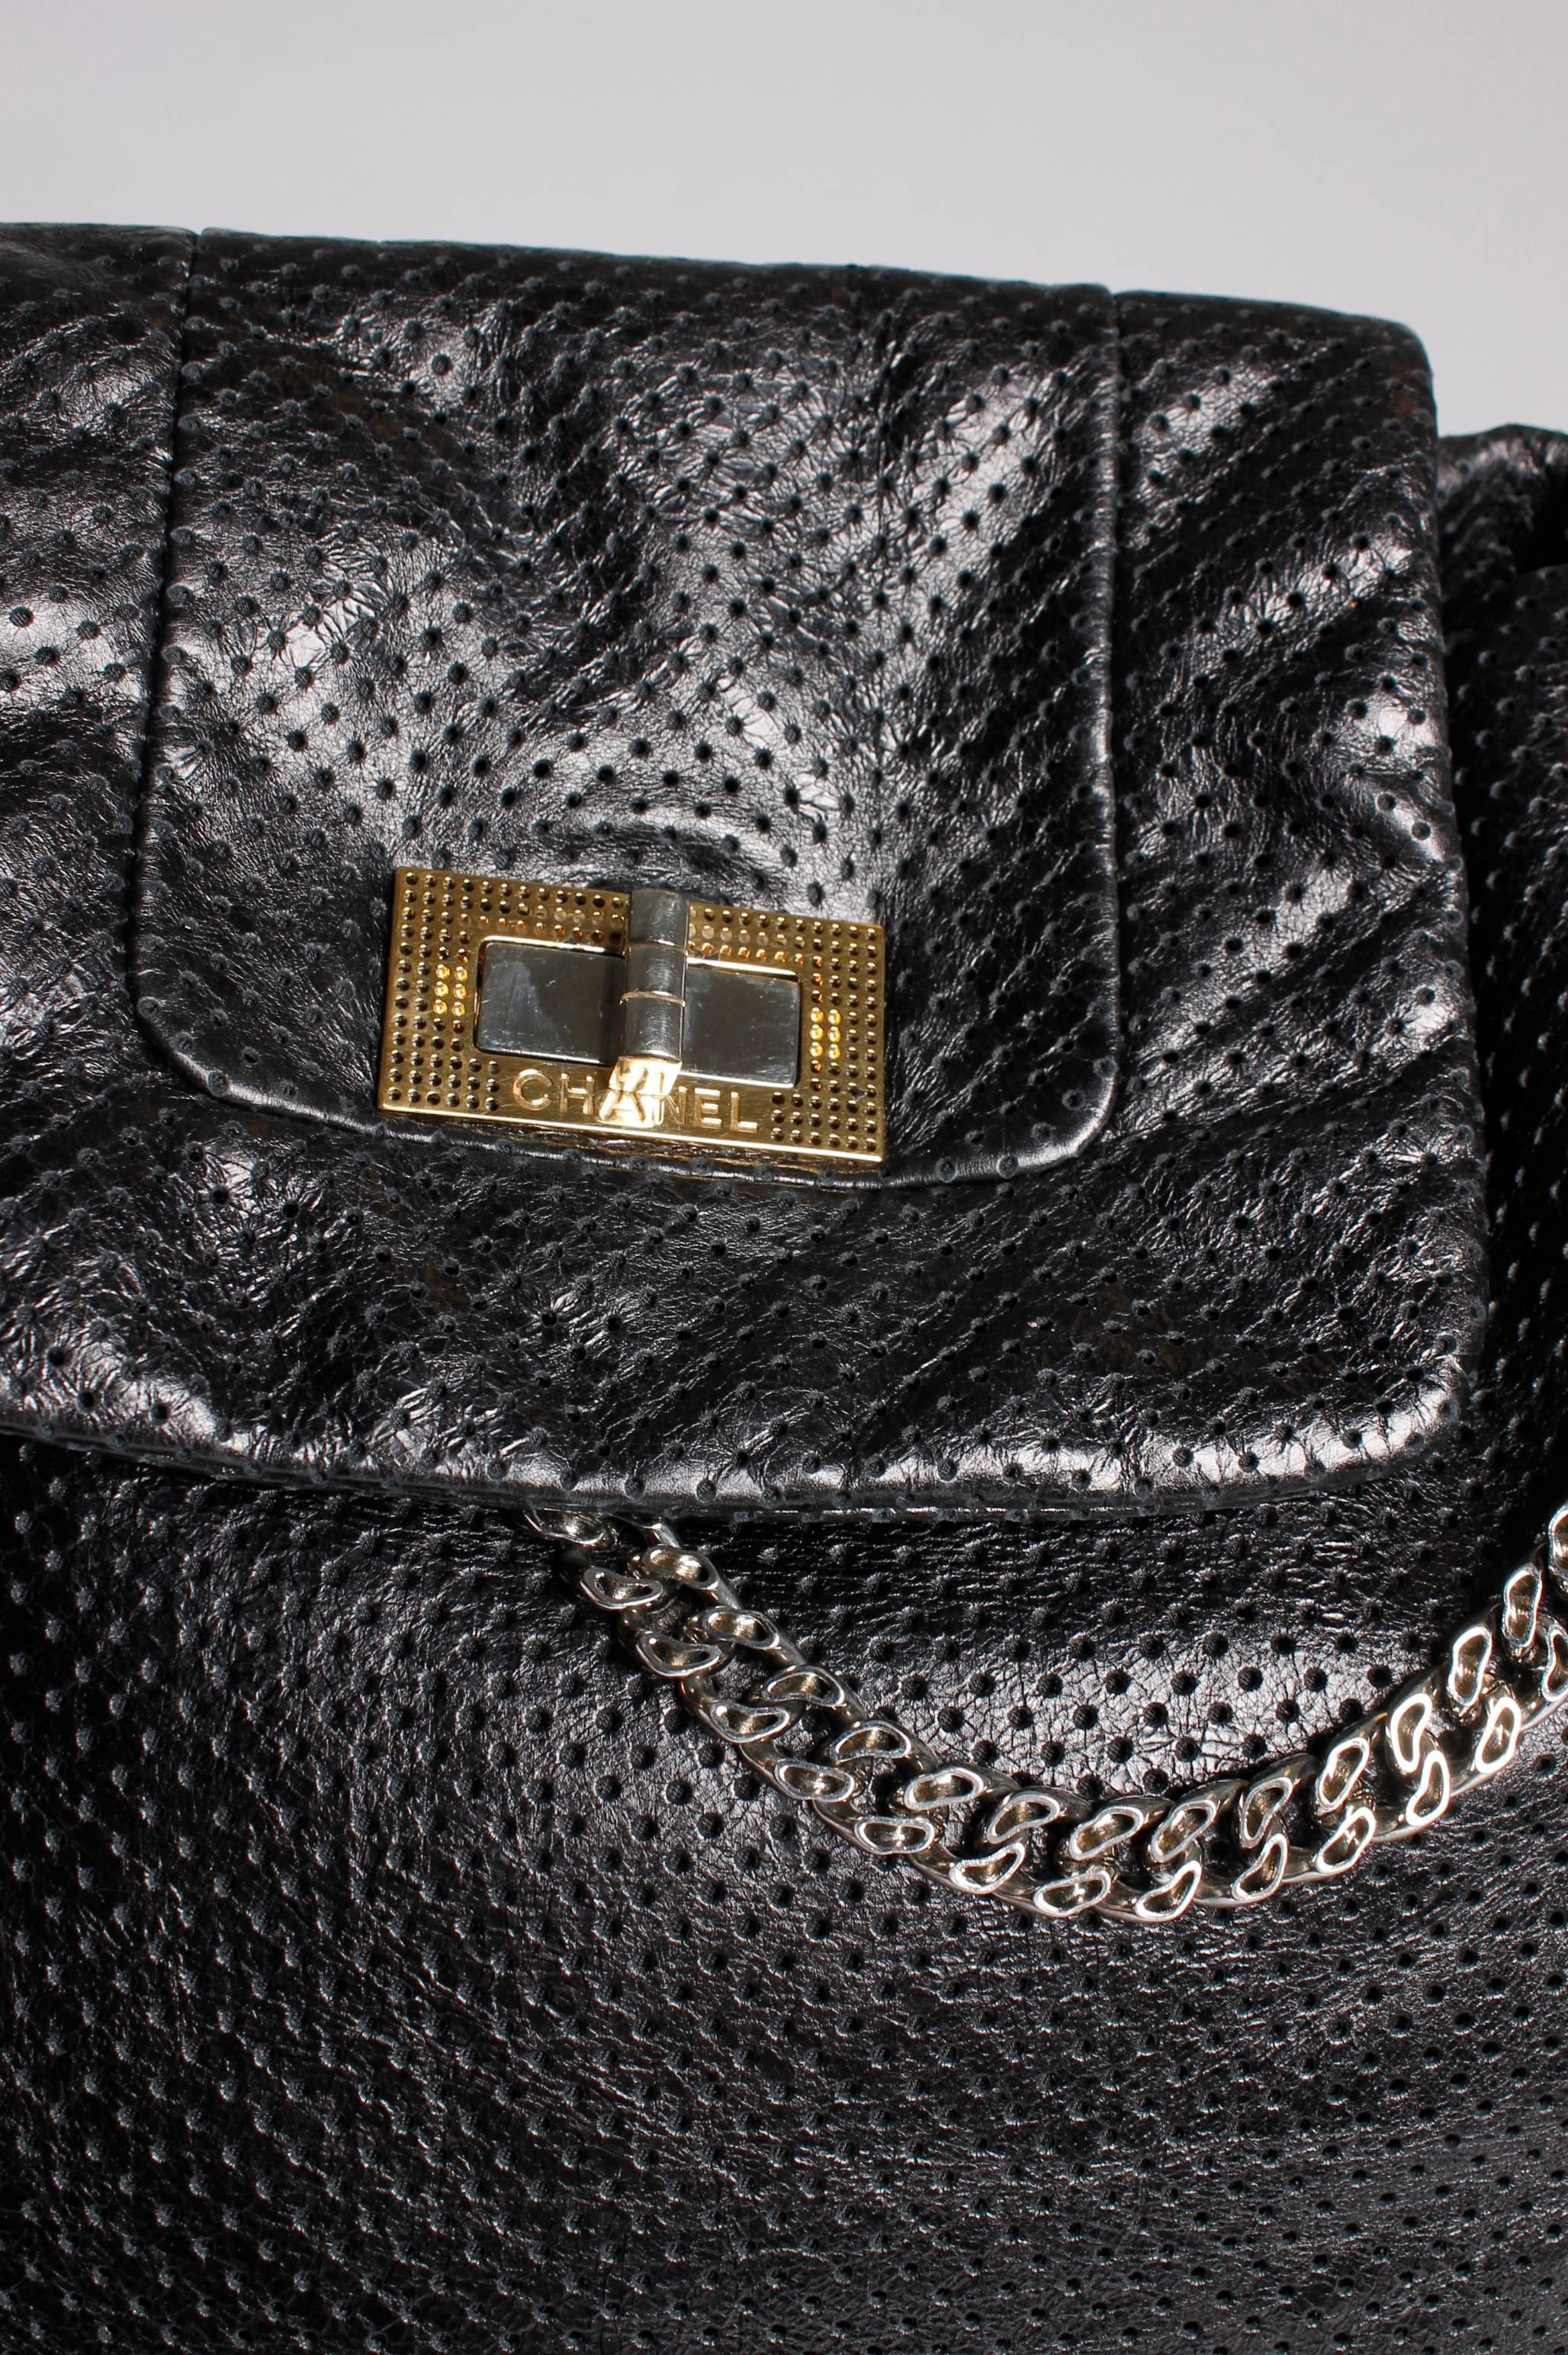 Chanel Reissue Perforated Leather Drill Large Tote Bag - black 1